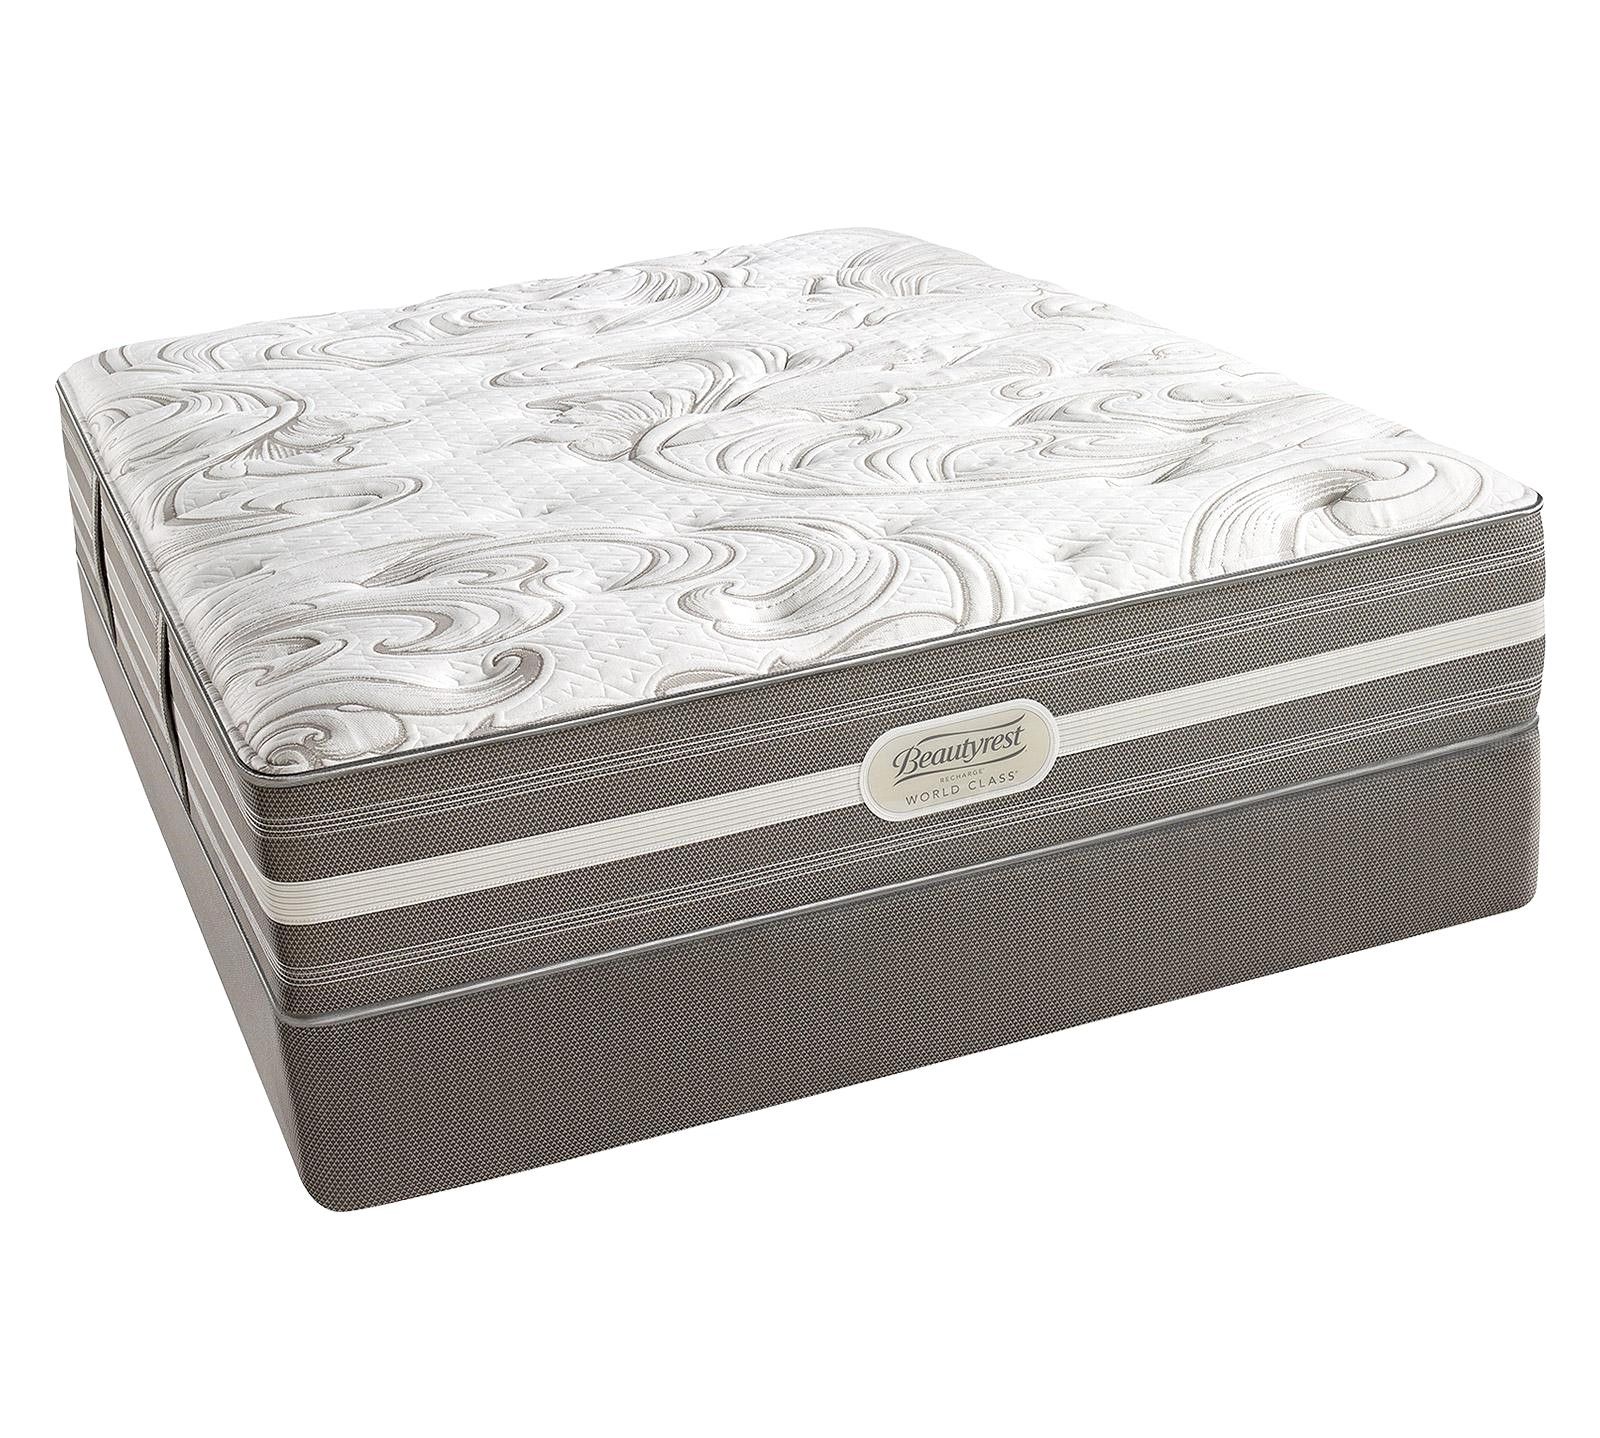 Pin on Local Mattress Manufacturers in USA